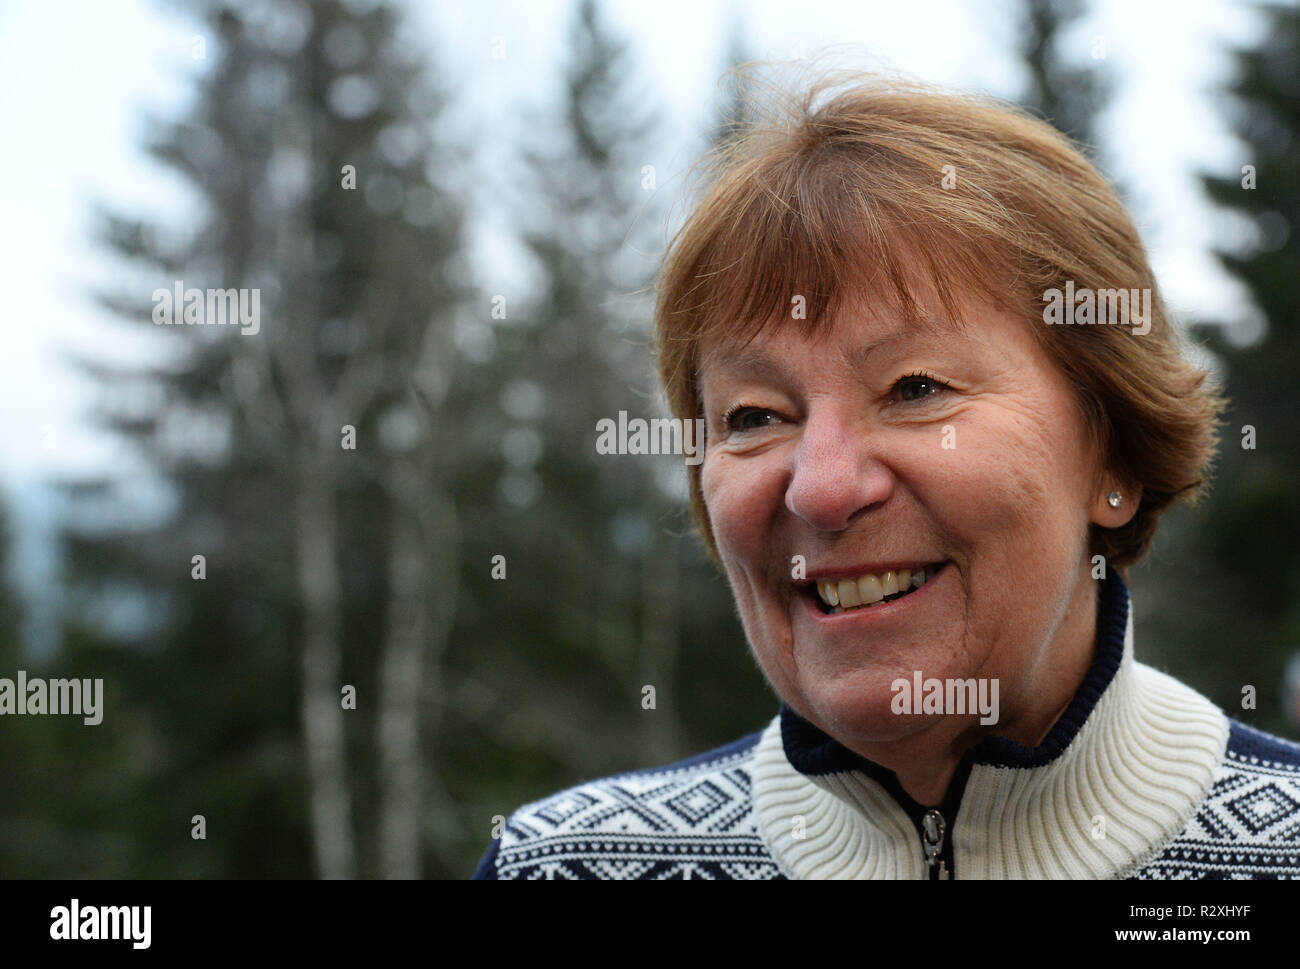 Mayor of Oslo Marianne Borgen speaks to the media before a tree felling ceremony, in Oslo, Norway. Stock Photo